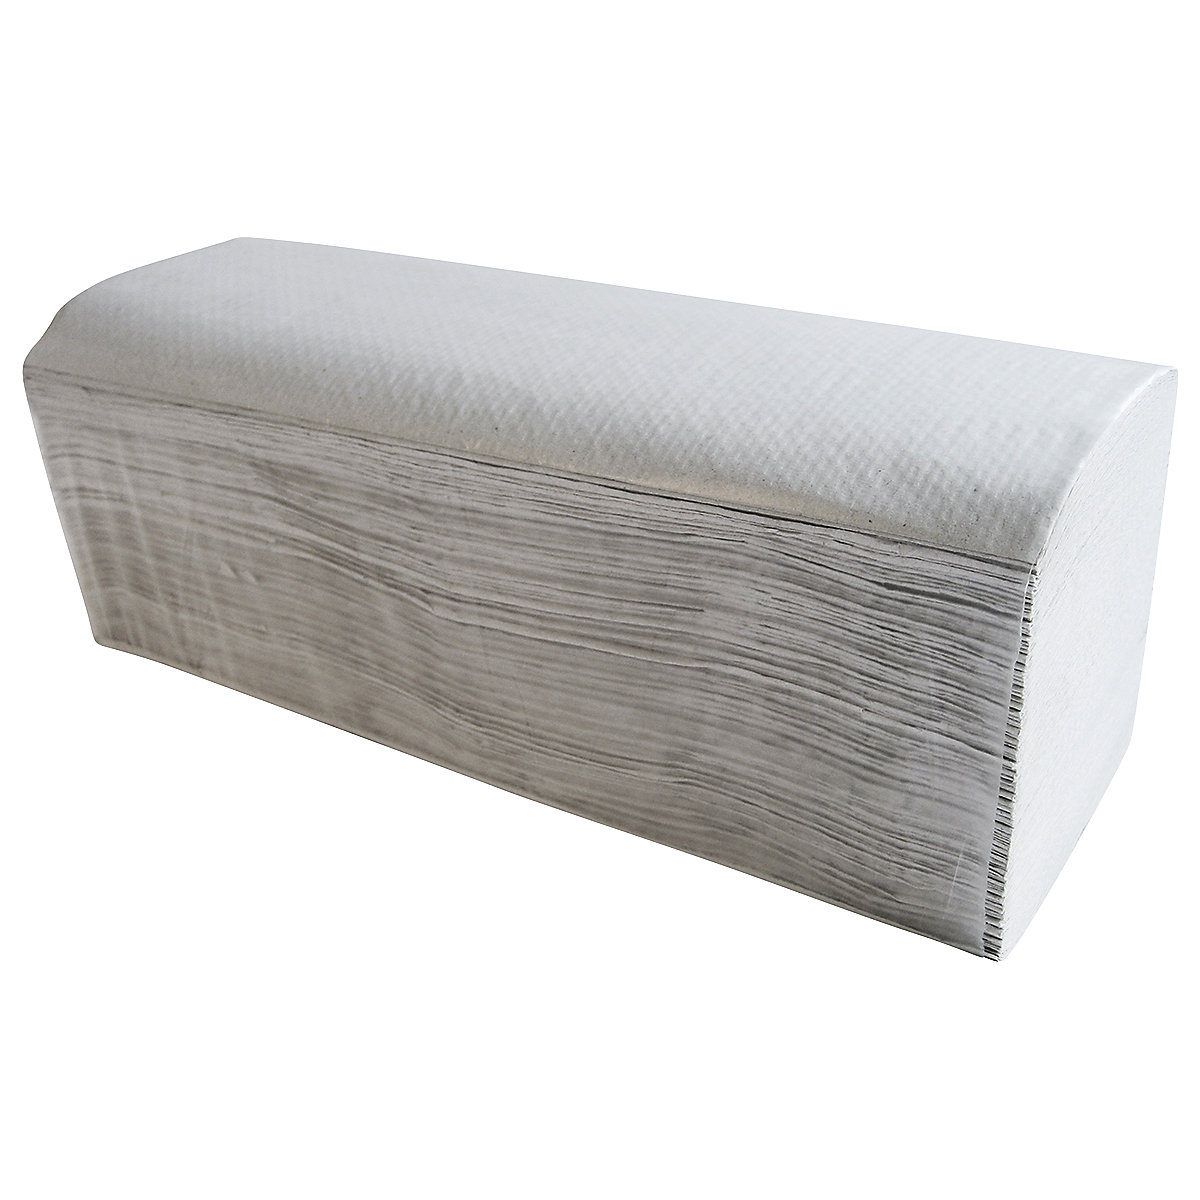 Recycled folded paper towels – CWS